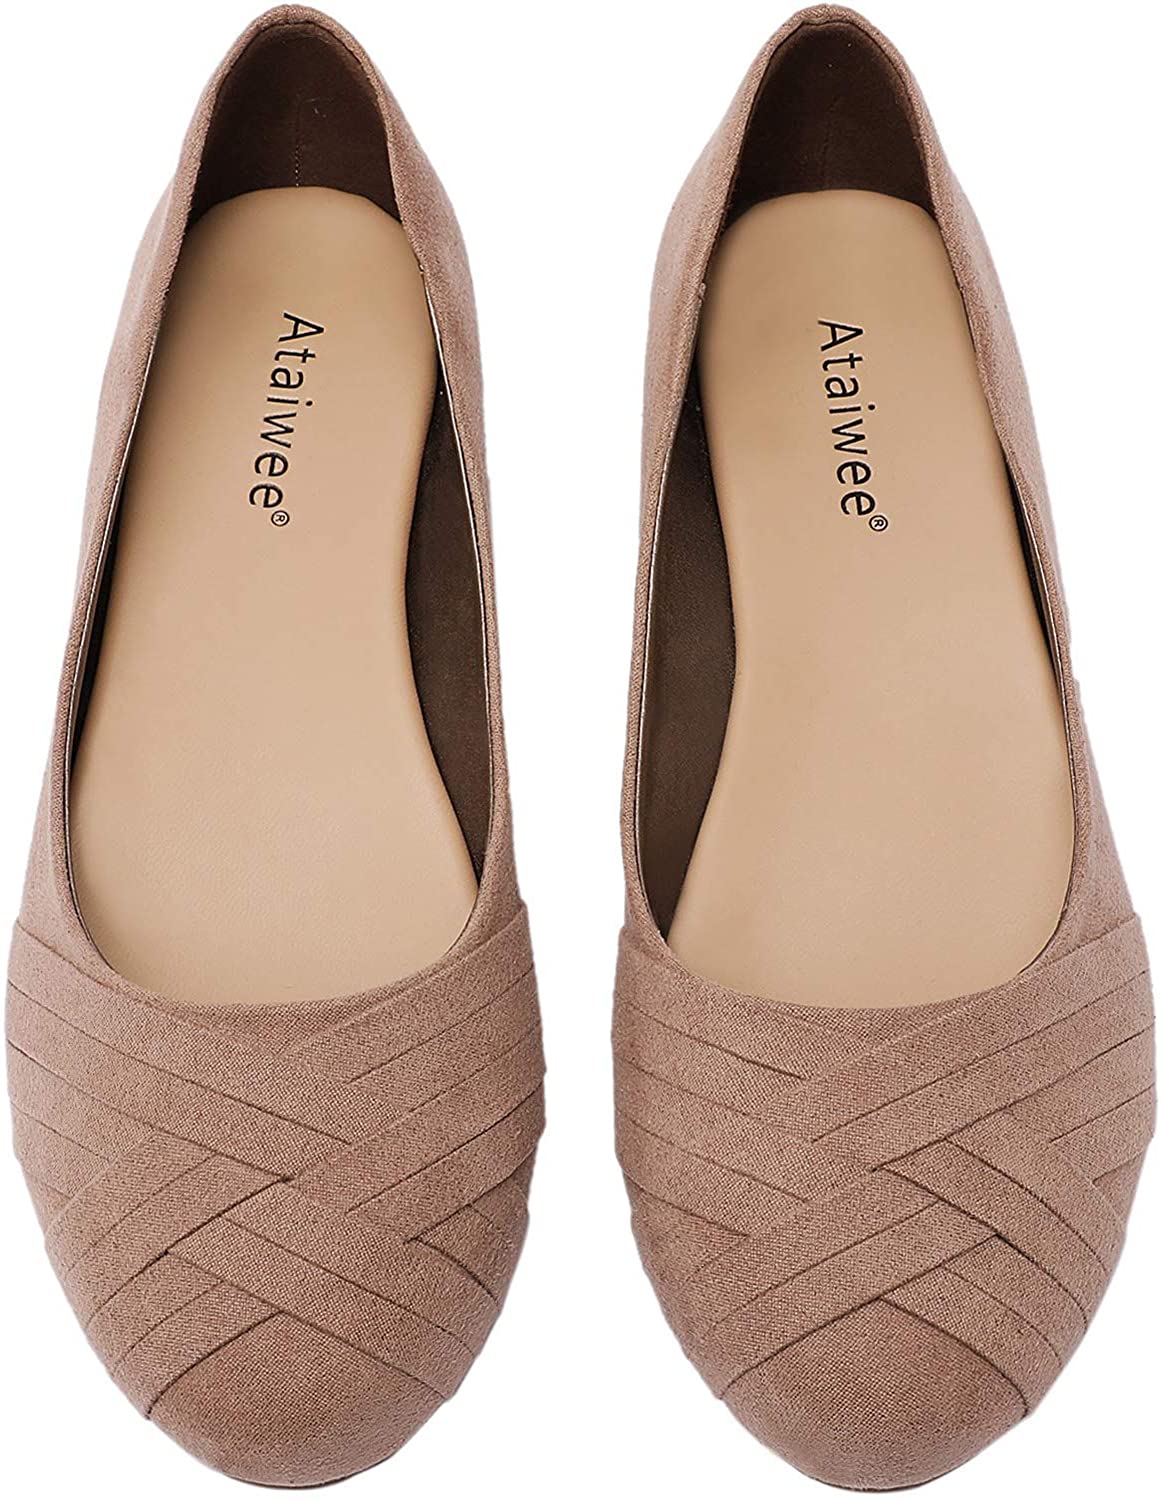 Ataiwee Women's Flat Shoes Comfortable Round Toe Classic Cute Slip-on Ballet Flats. 